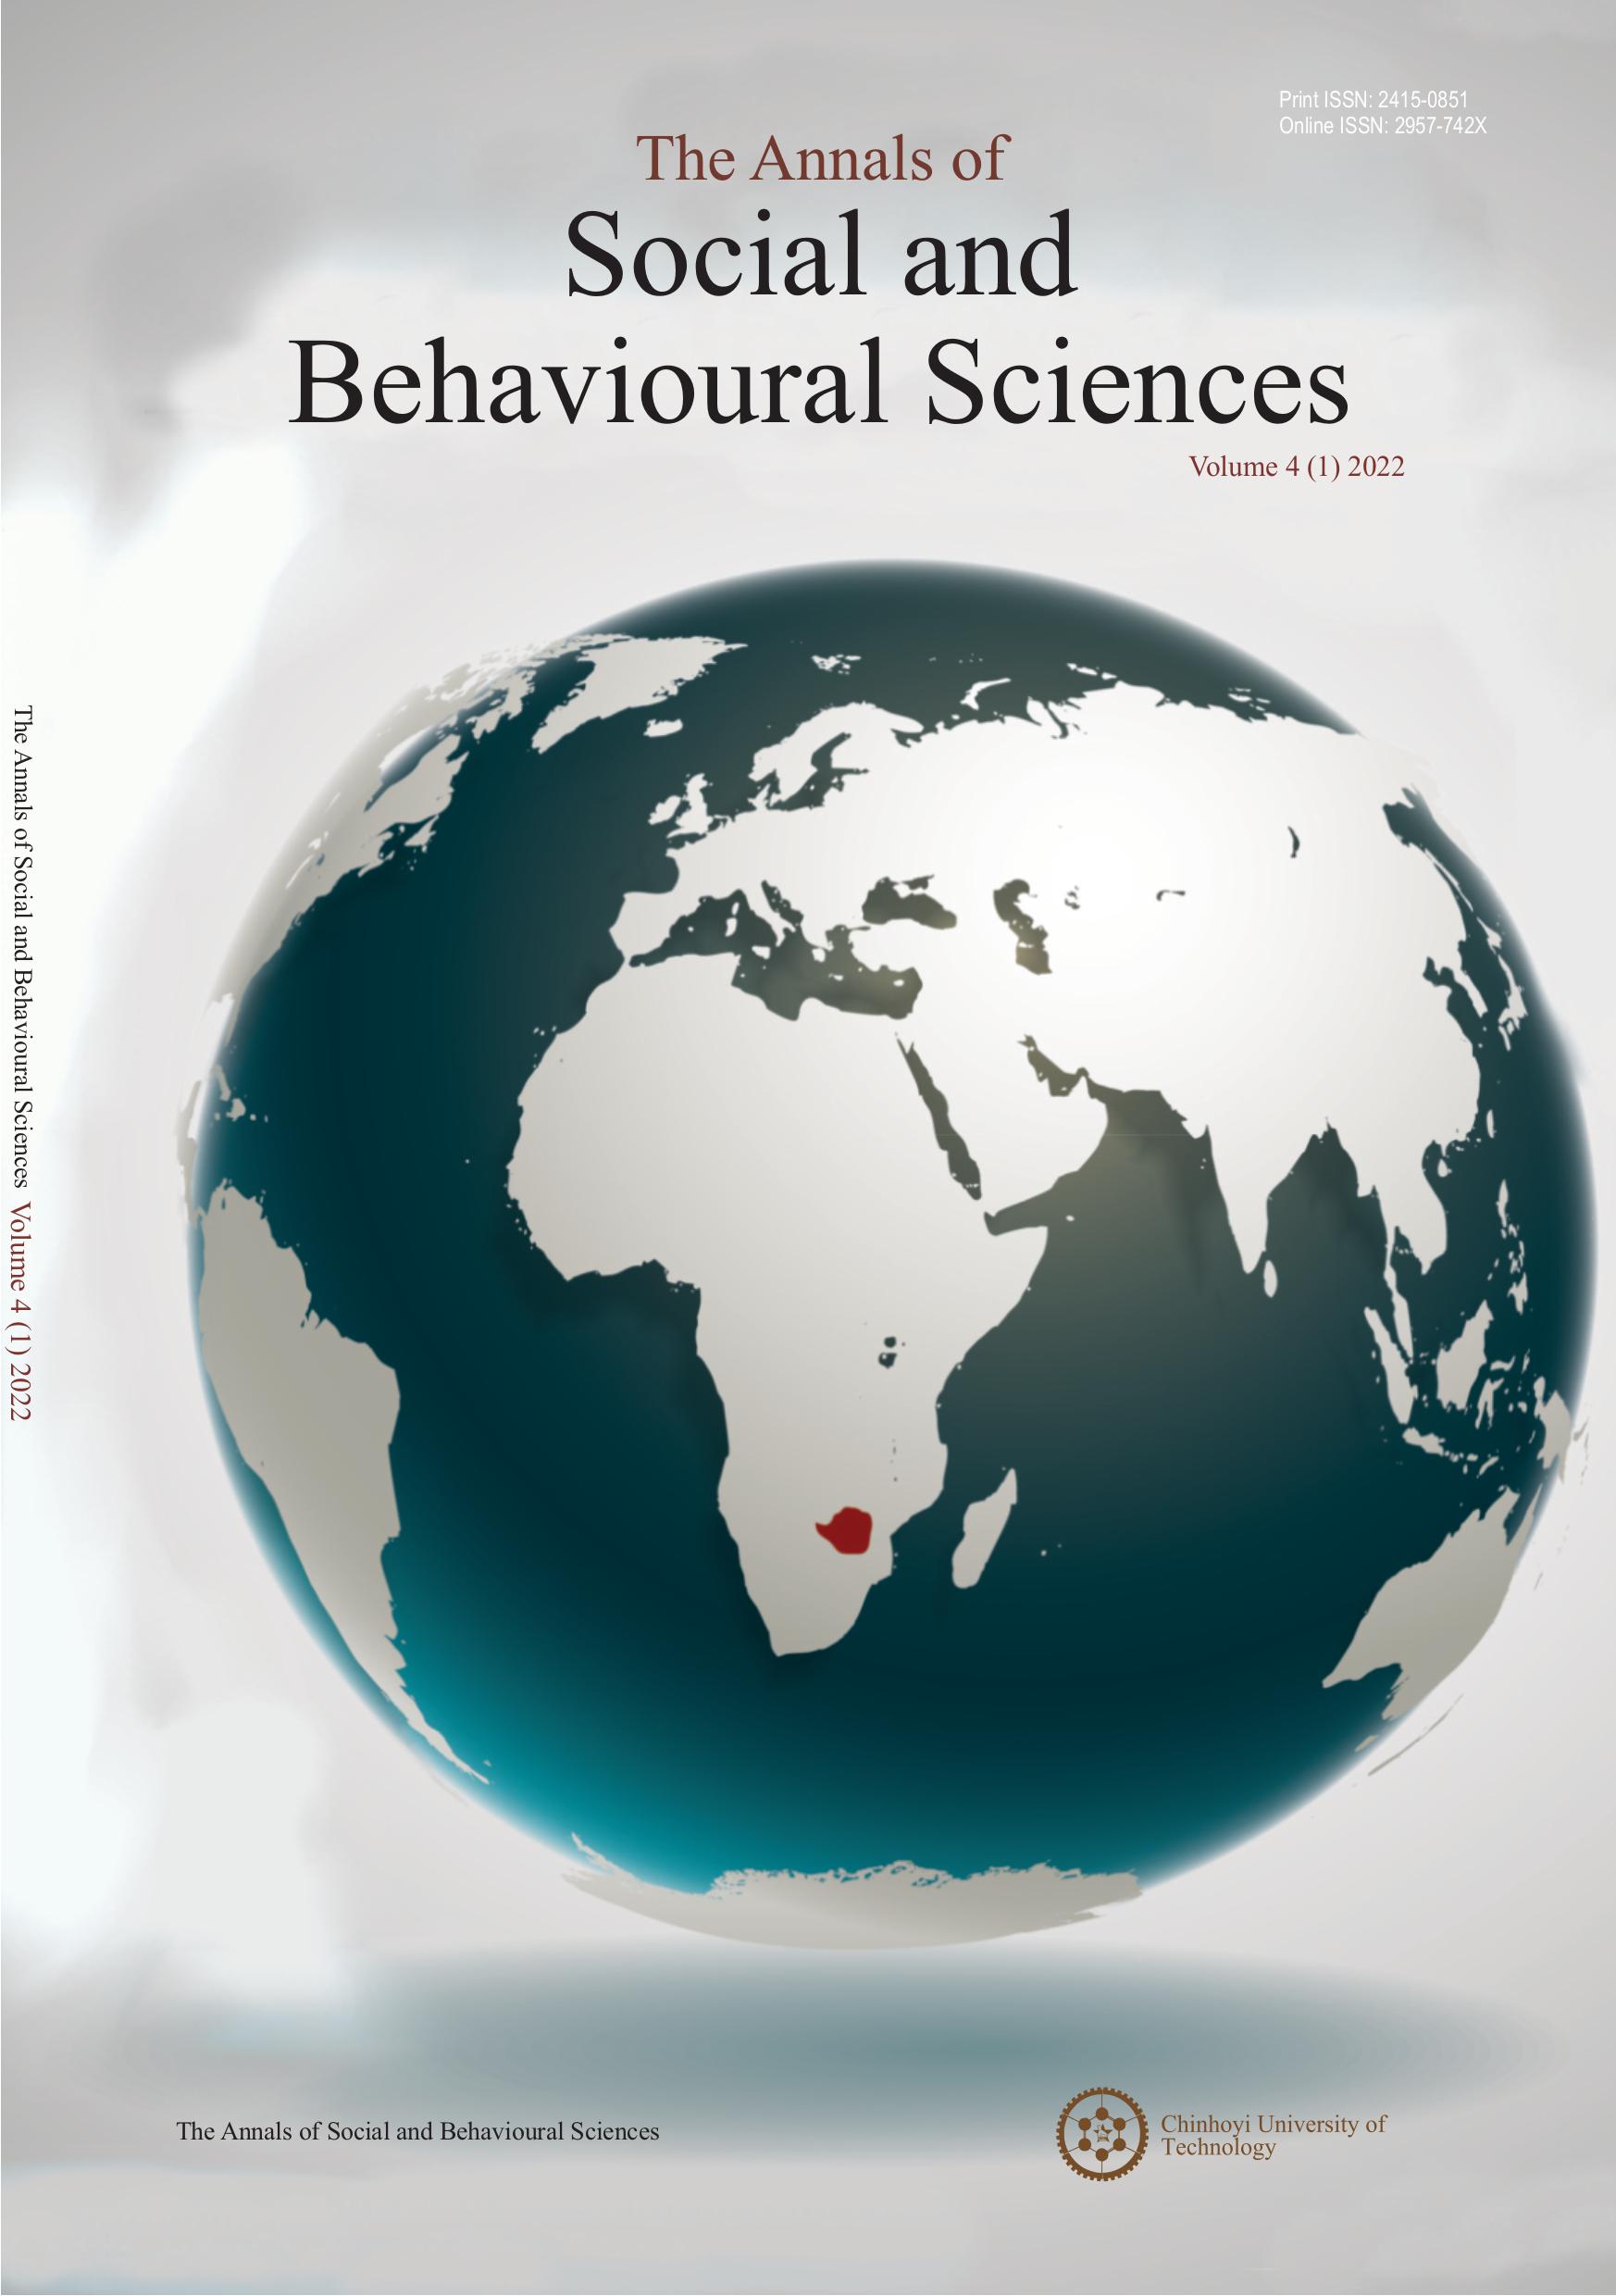 					View Vol. 4 No. 1 (2022): Annals of Social and Behavioural Sciences Journal
				